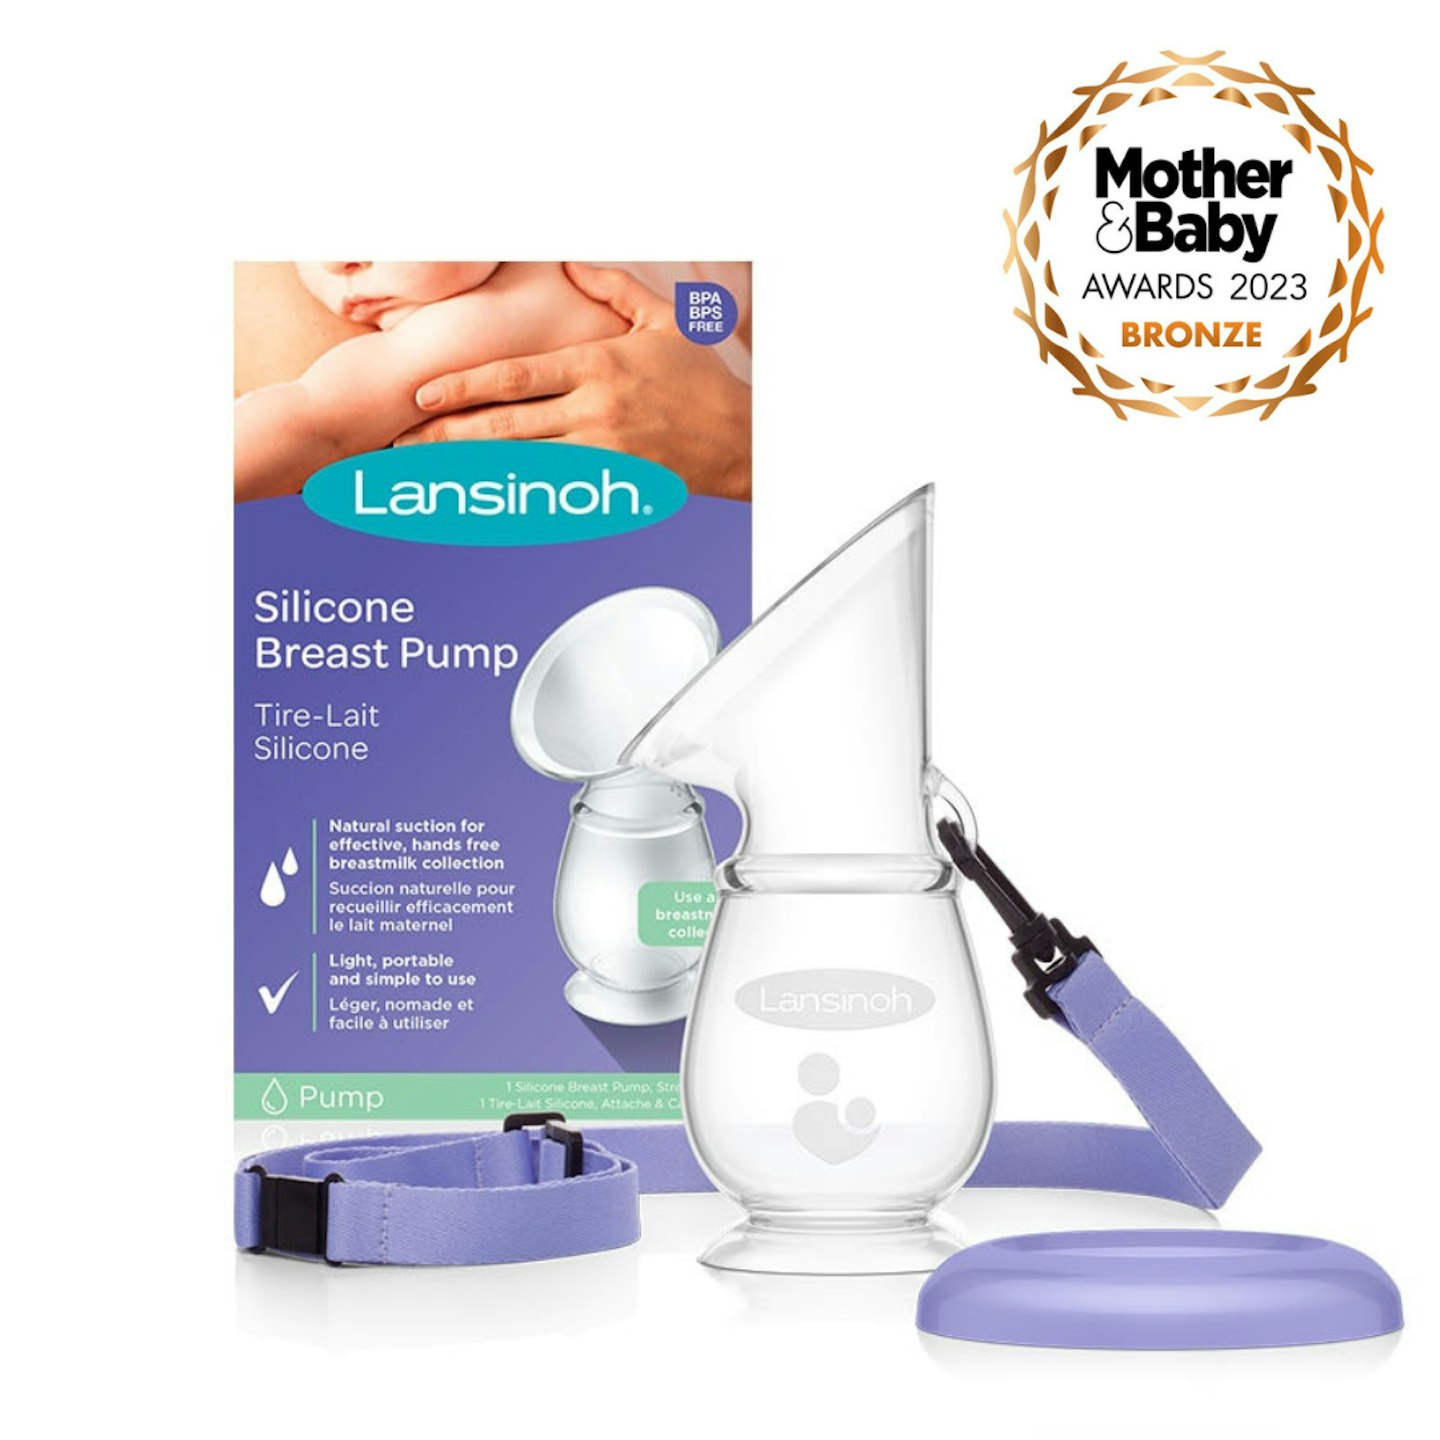 Best Breast Pump of the Year  Gold Award from Mother&Baby Awards 2023